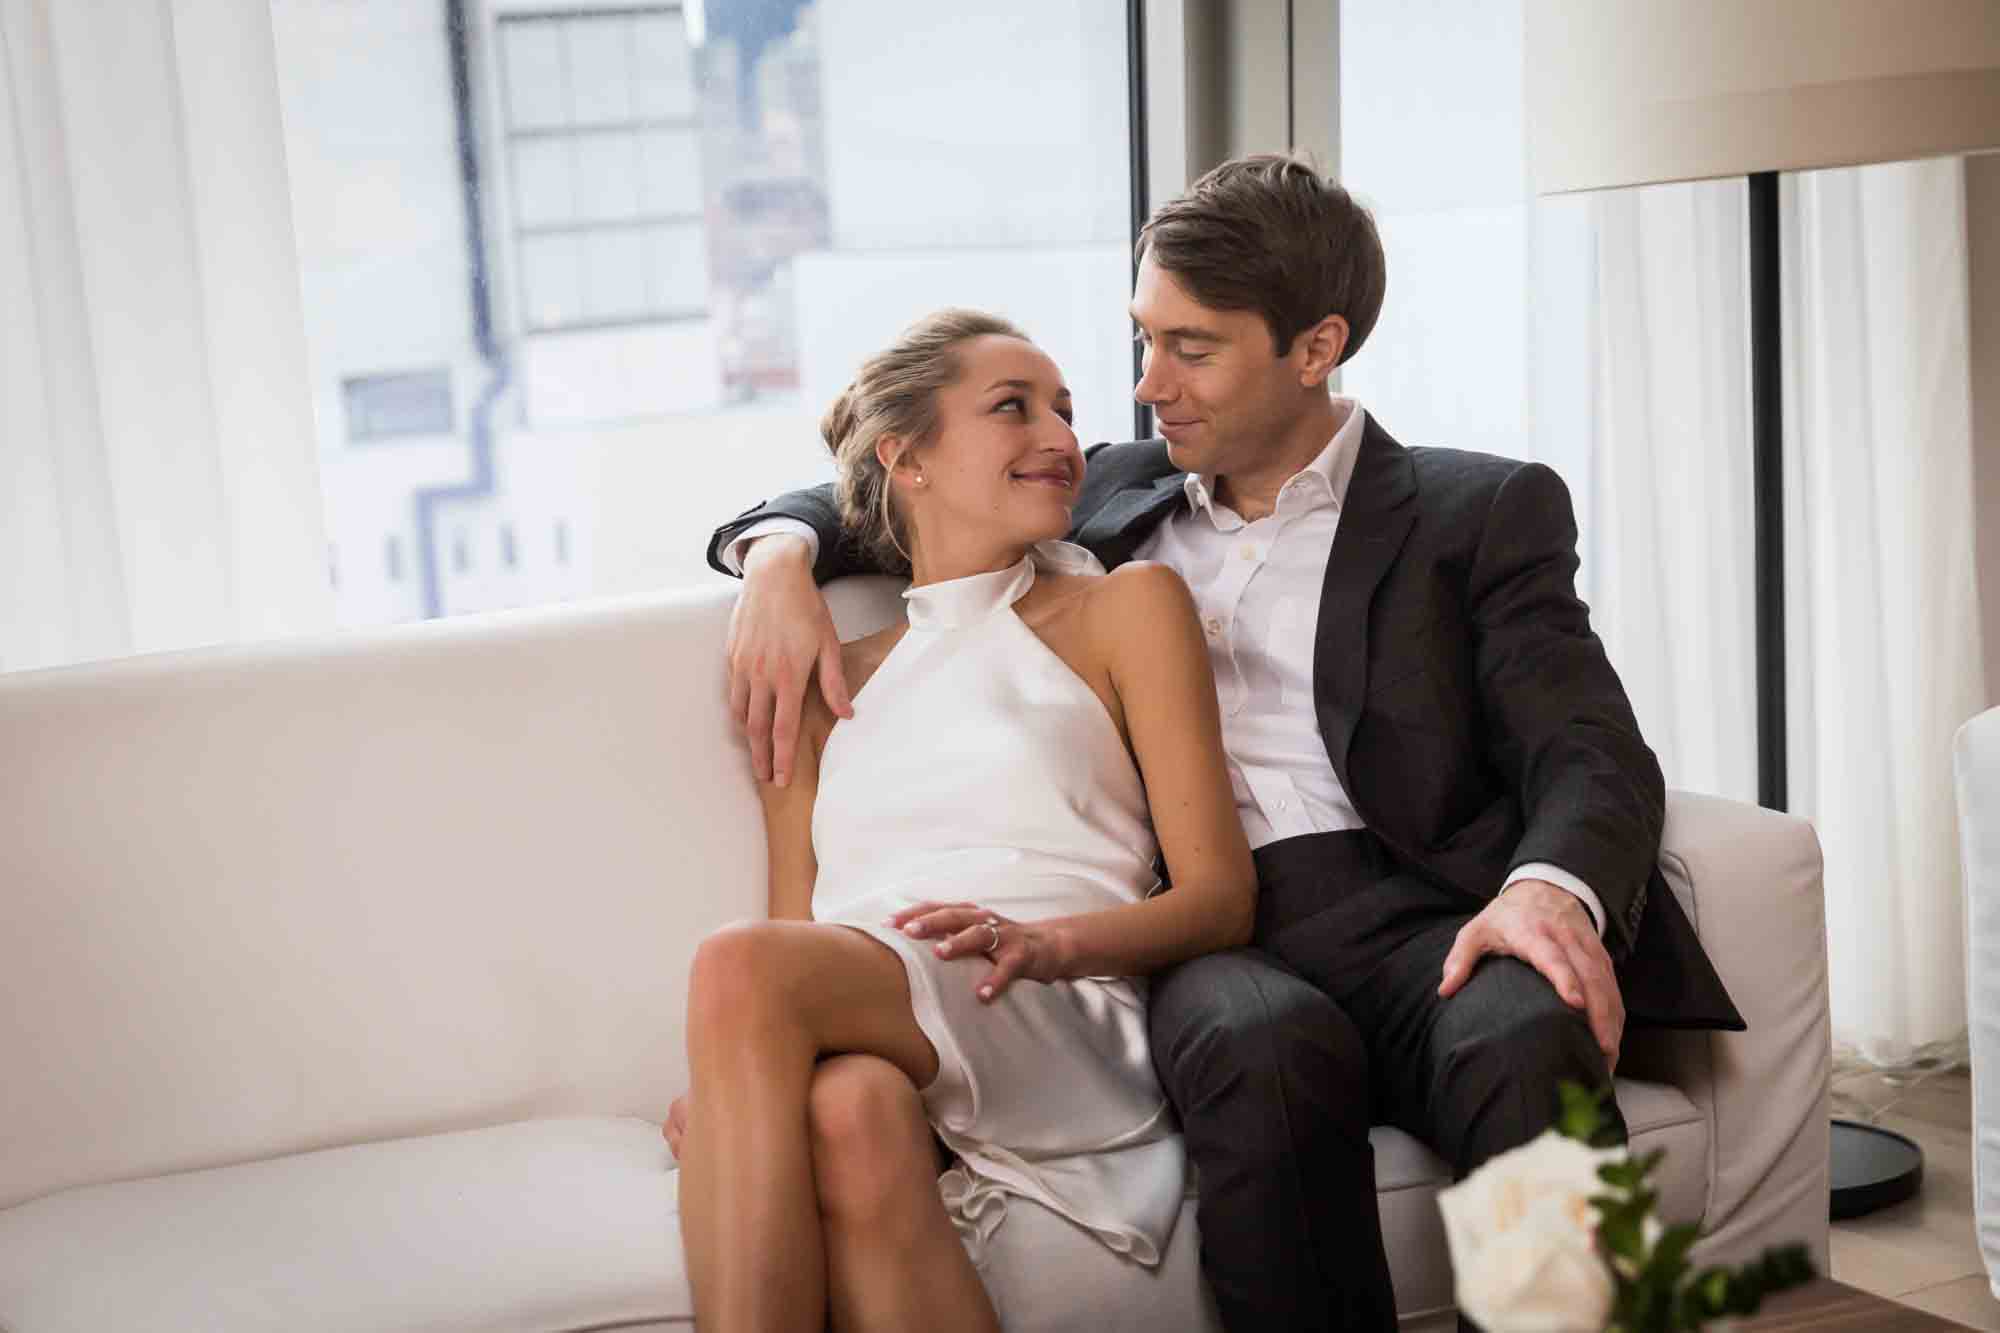 Couple sitting together on white couch for an article on how to plan a hotel room wedding ceremony